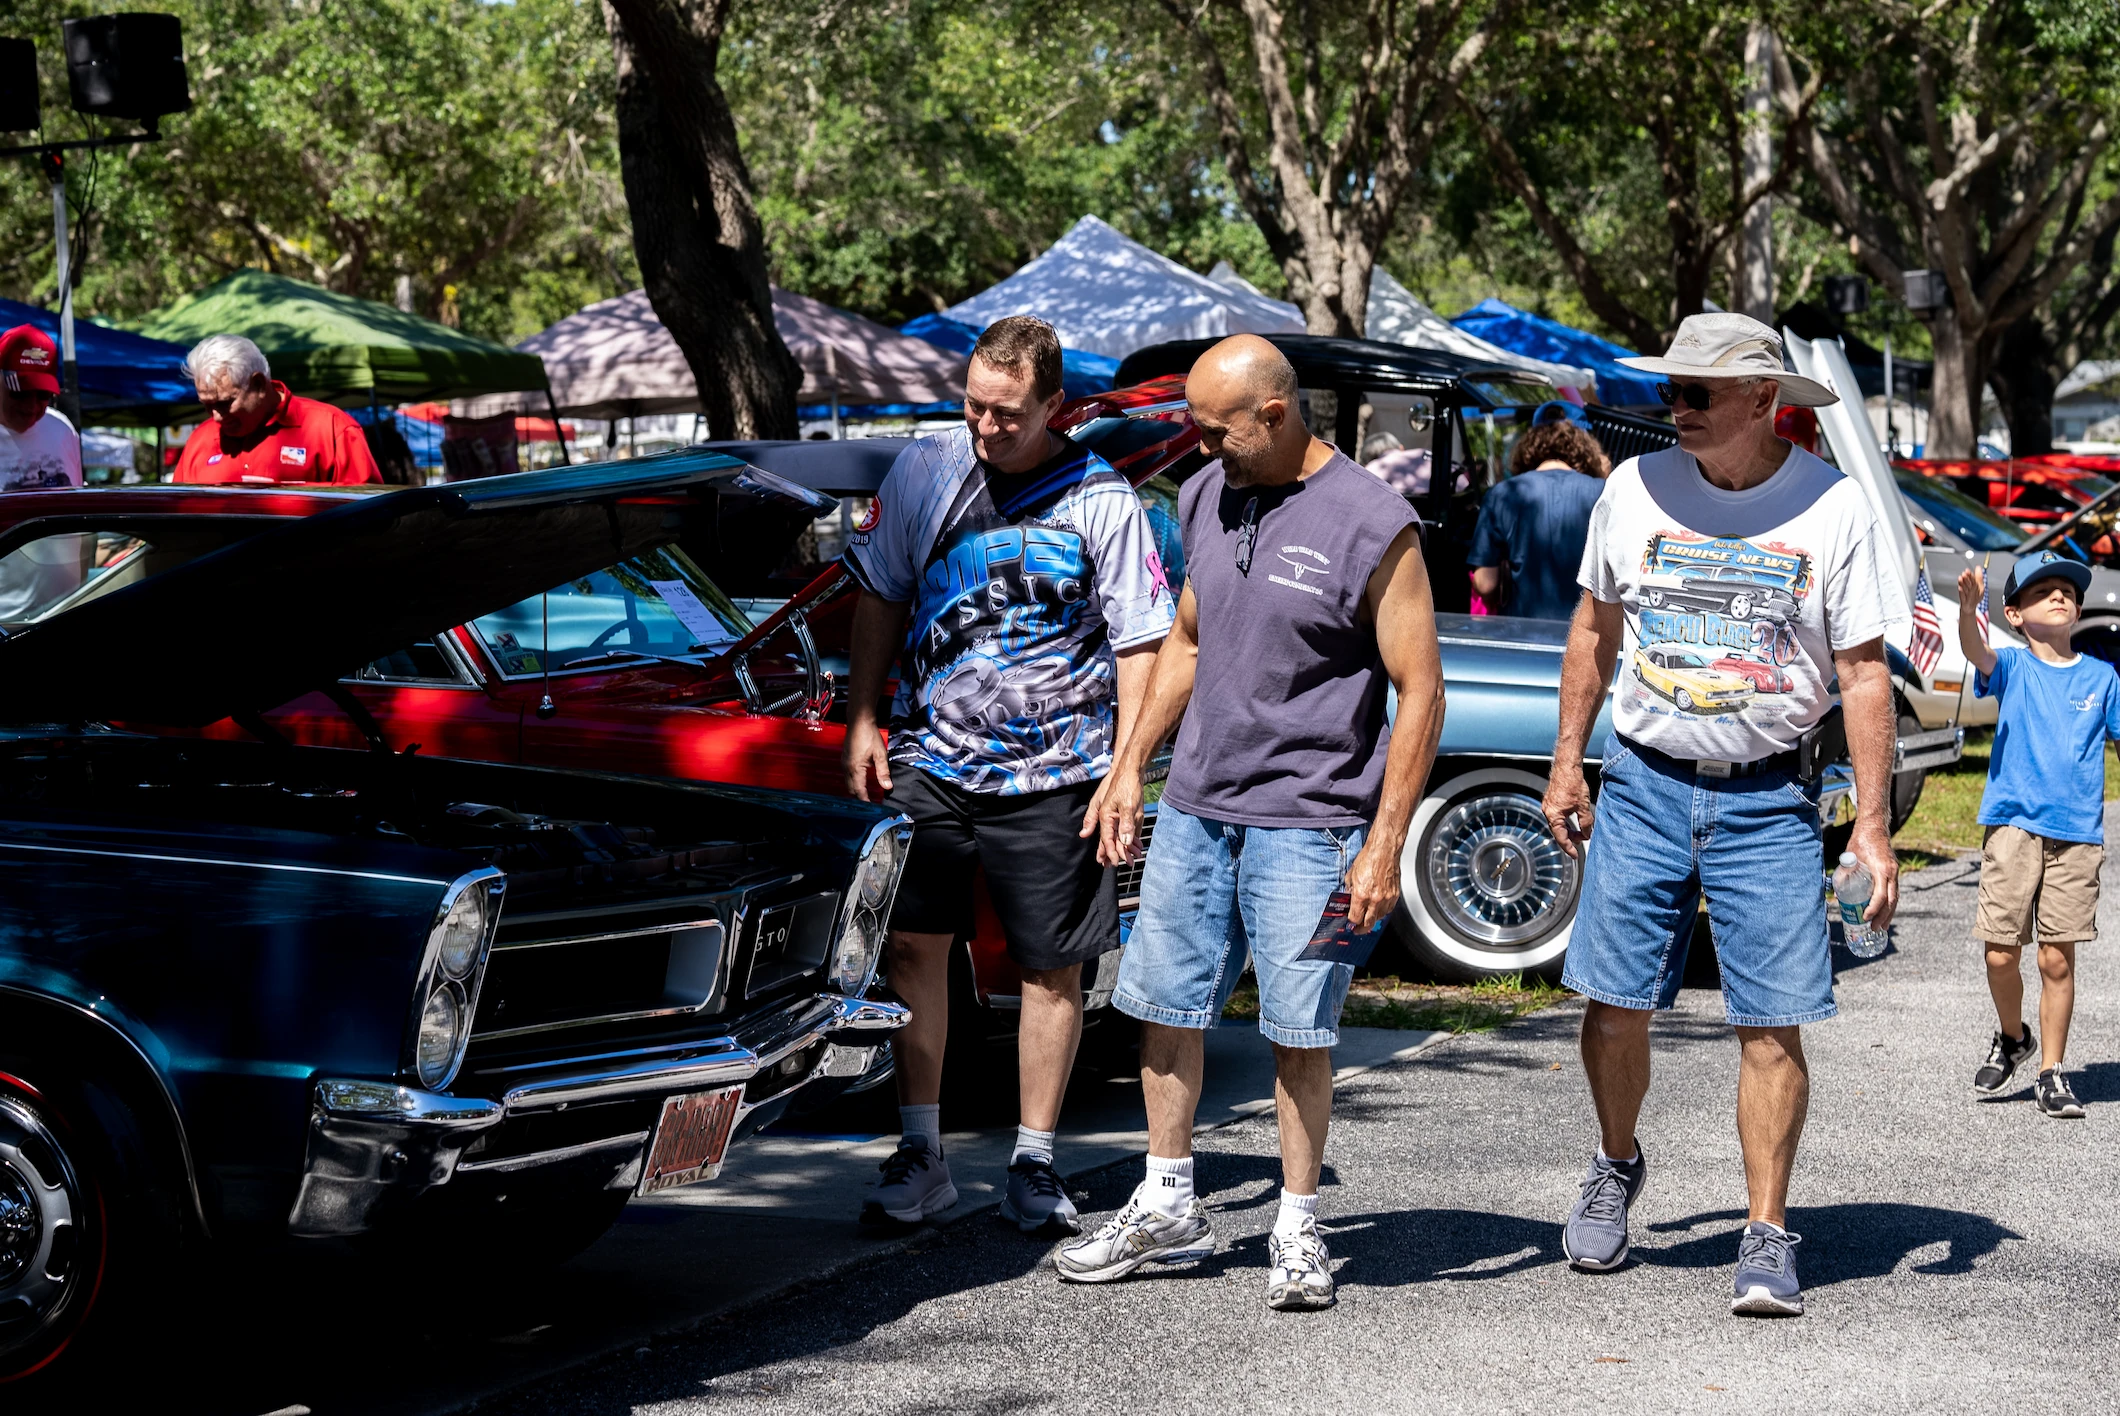 A crowd of people walking down a road lined with classic cars and hot rods, in the middle a golf cart sitting two people who are smiling and joyful as they ride past.